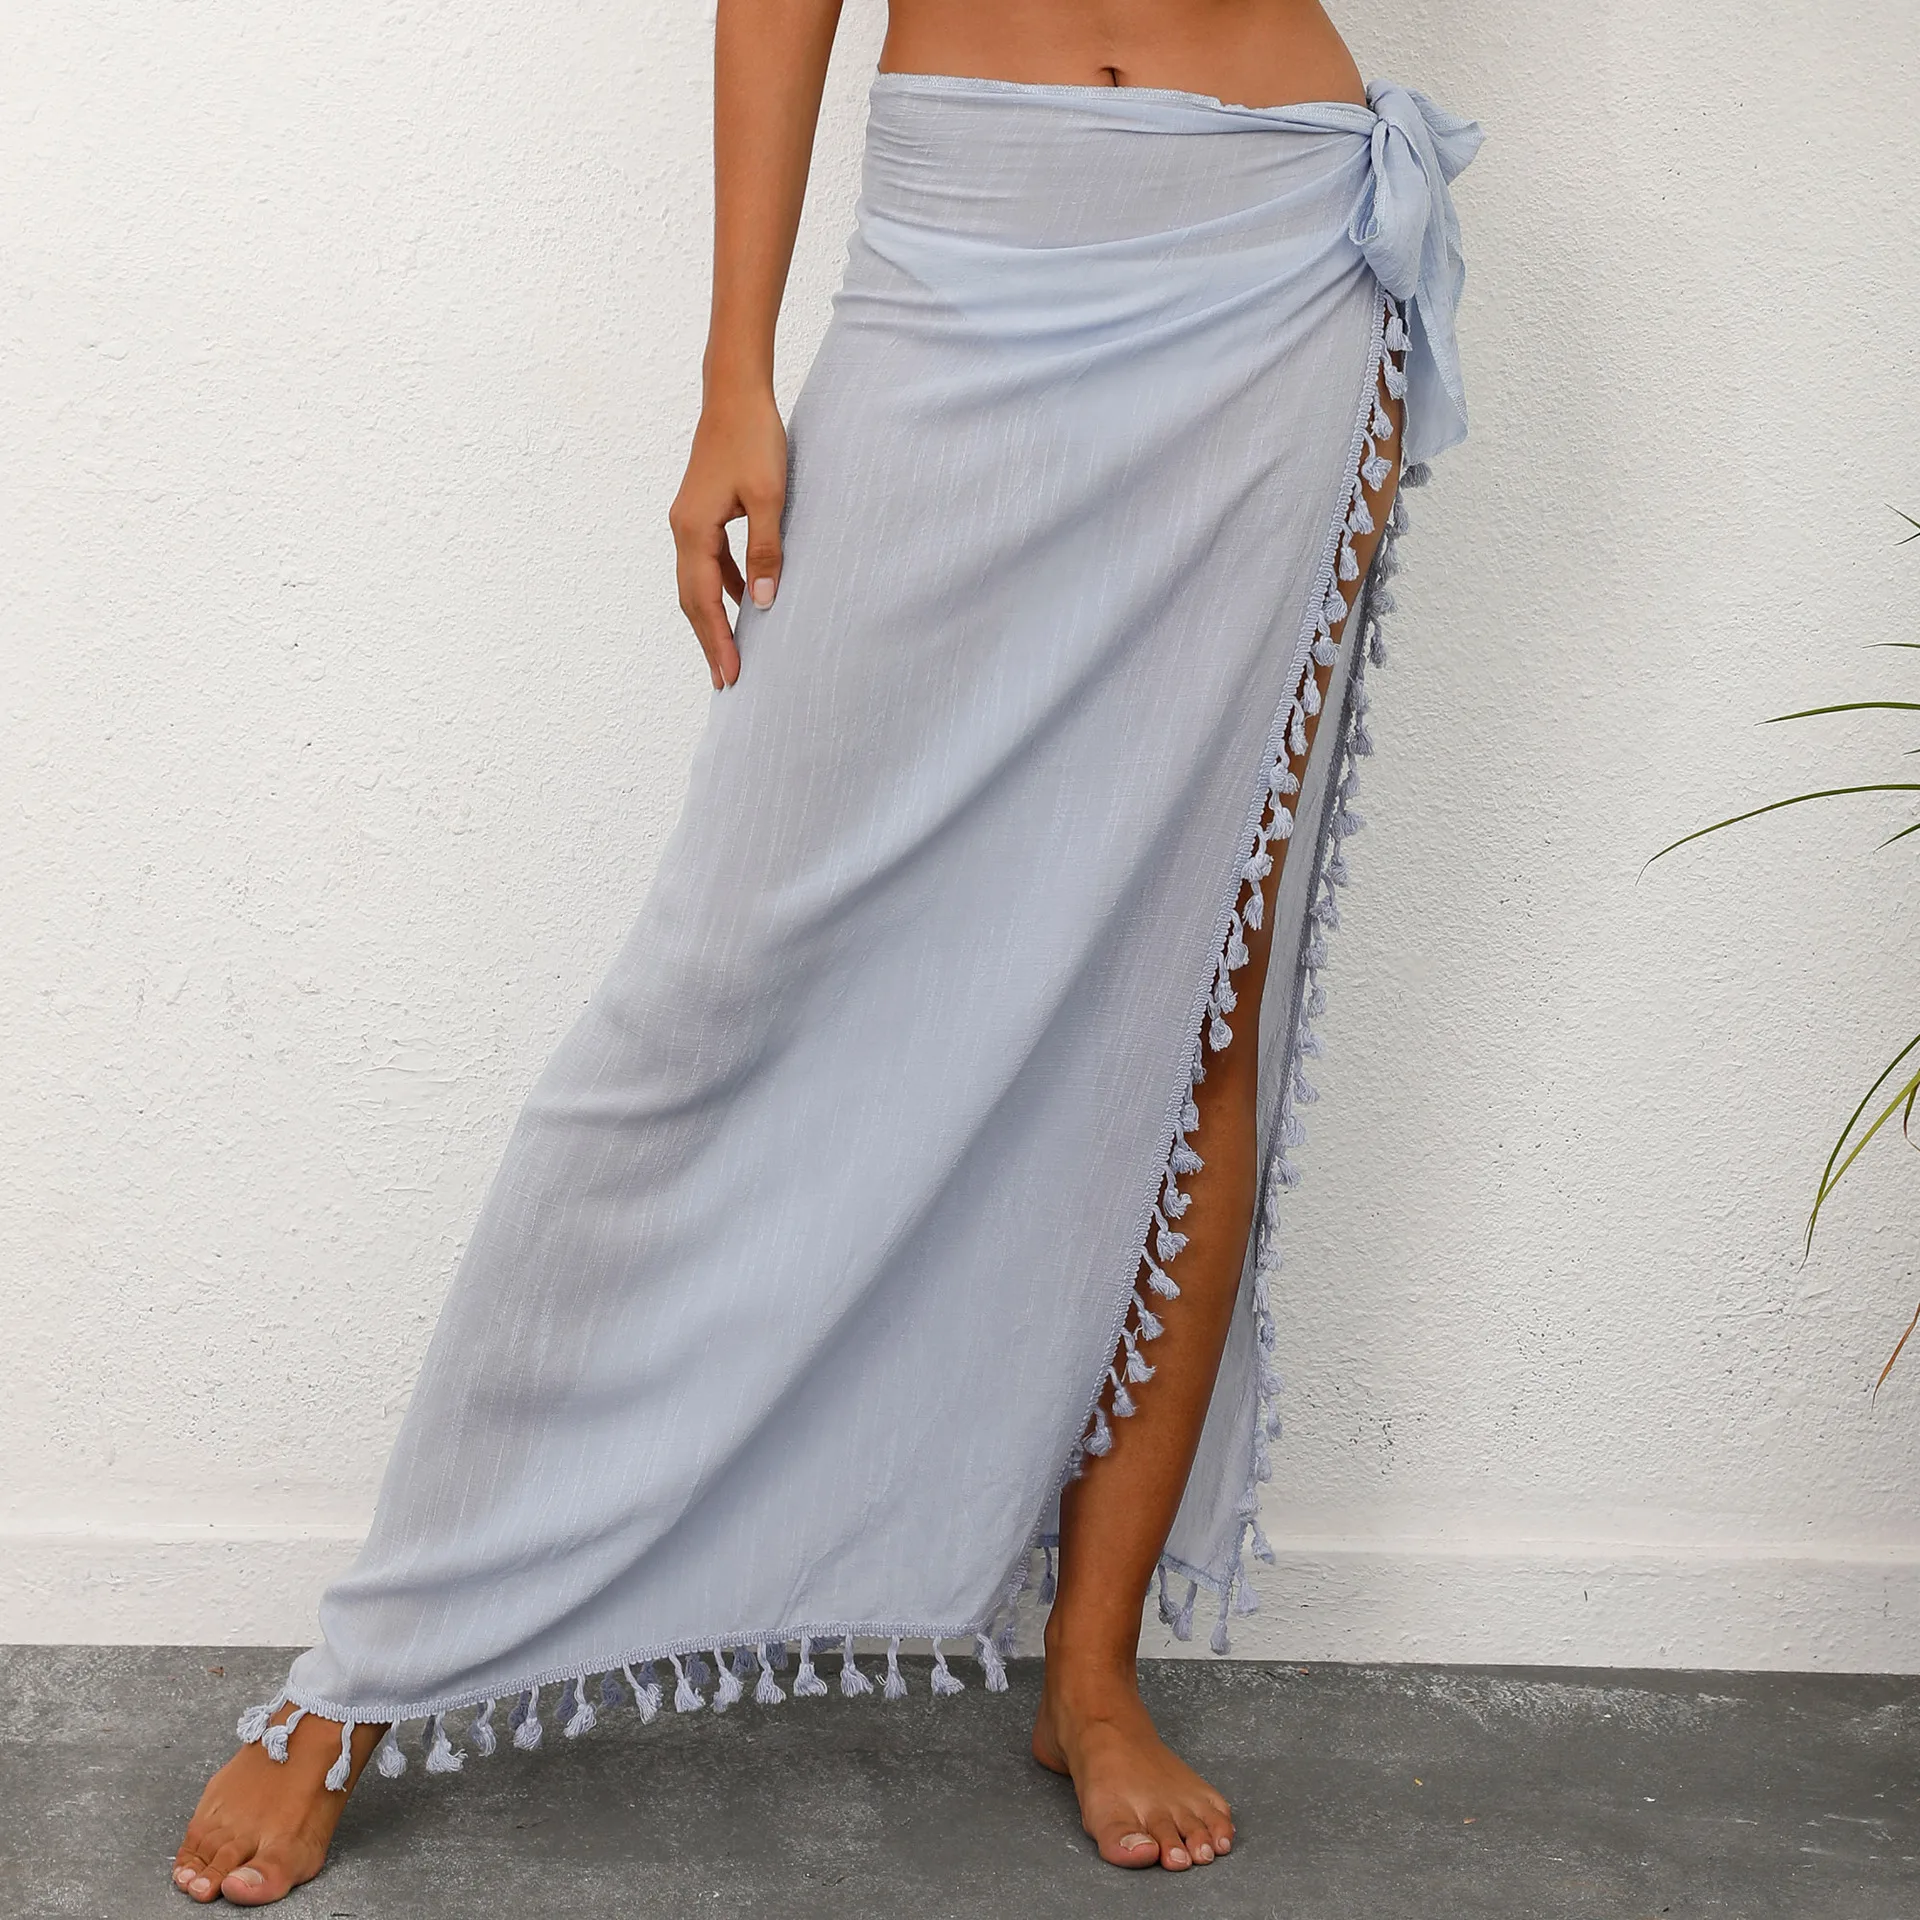 

Factory 2022 Women Beach Skirt Sarong Pareo Maxi Wrap Skirt Boho Swimsuit Cover Up, 9 colors available